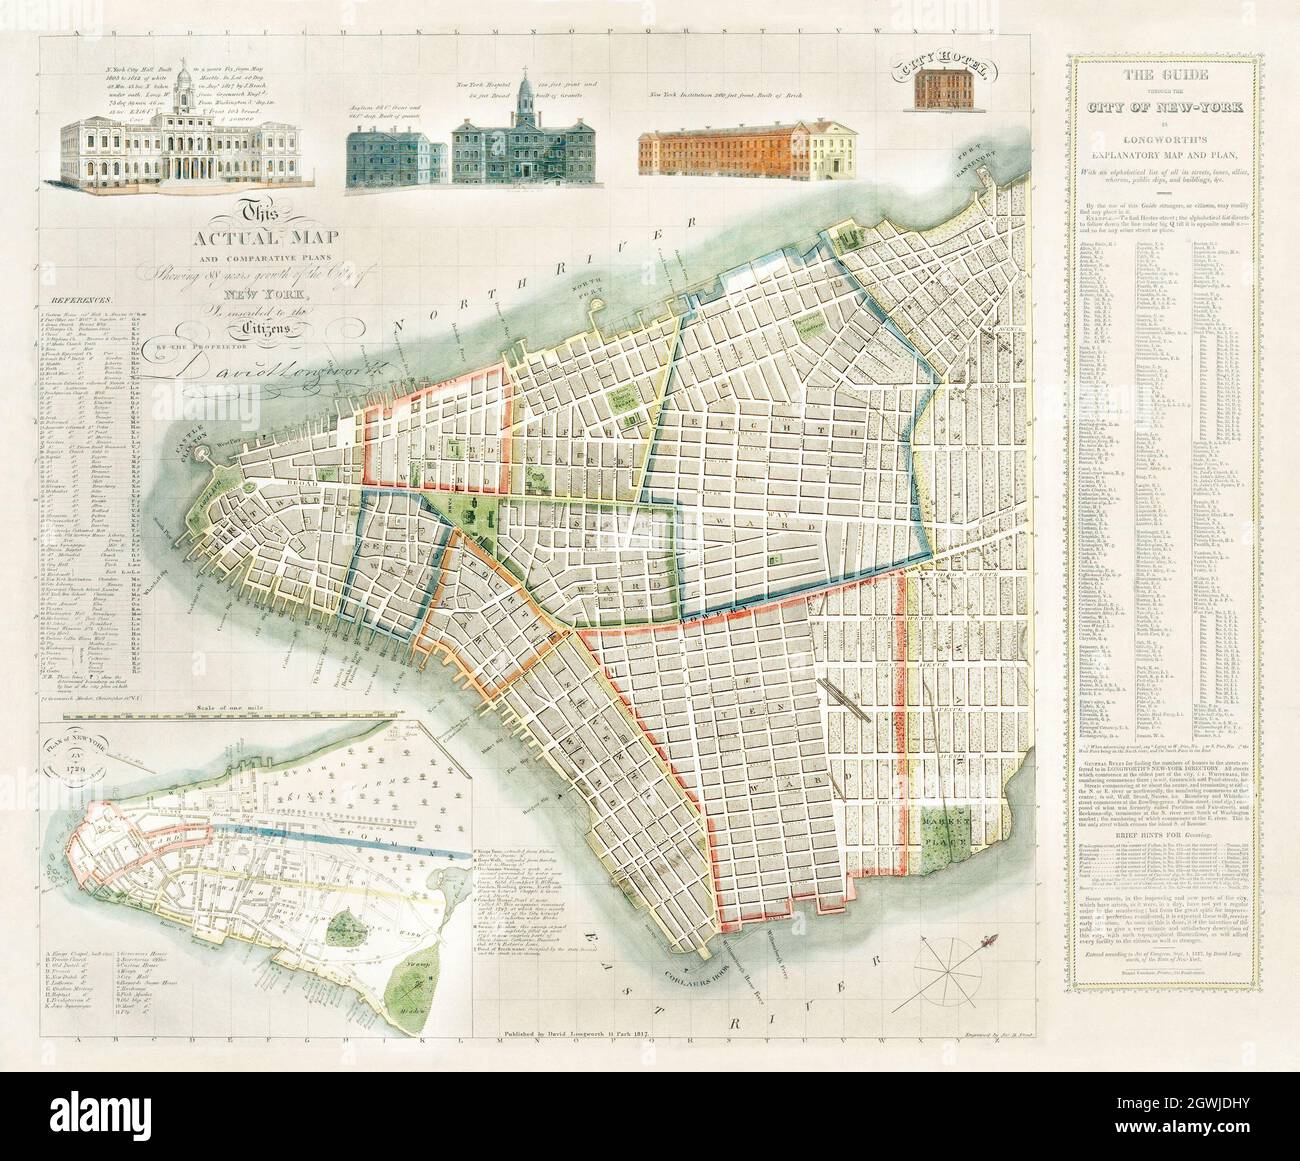 The City of New York: Longworth's Explanatory Map and Plan (1817) by David Longworth. Stock Photo